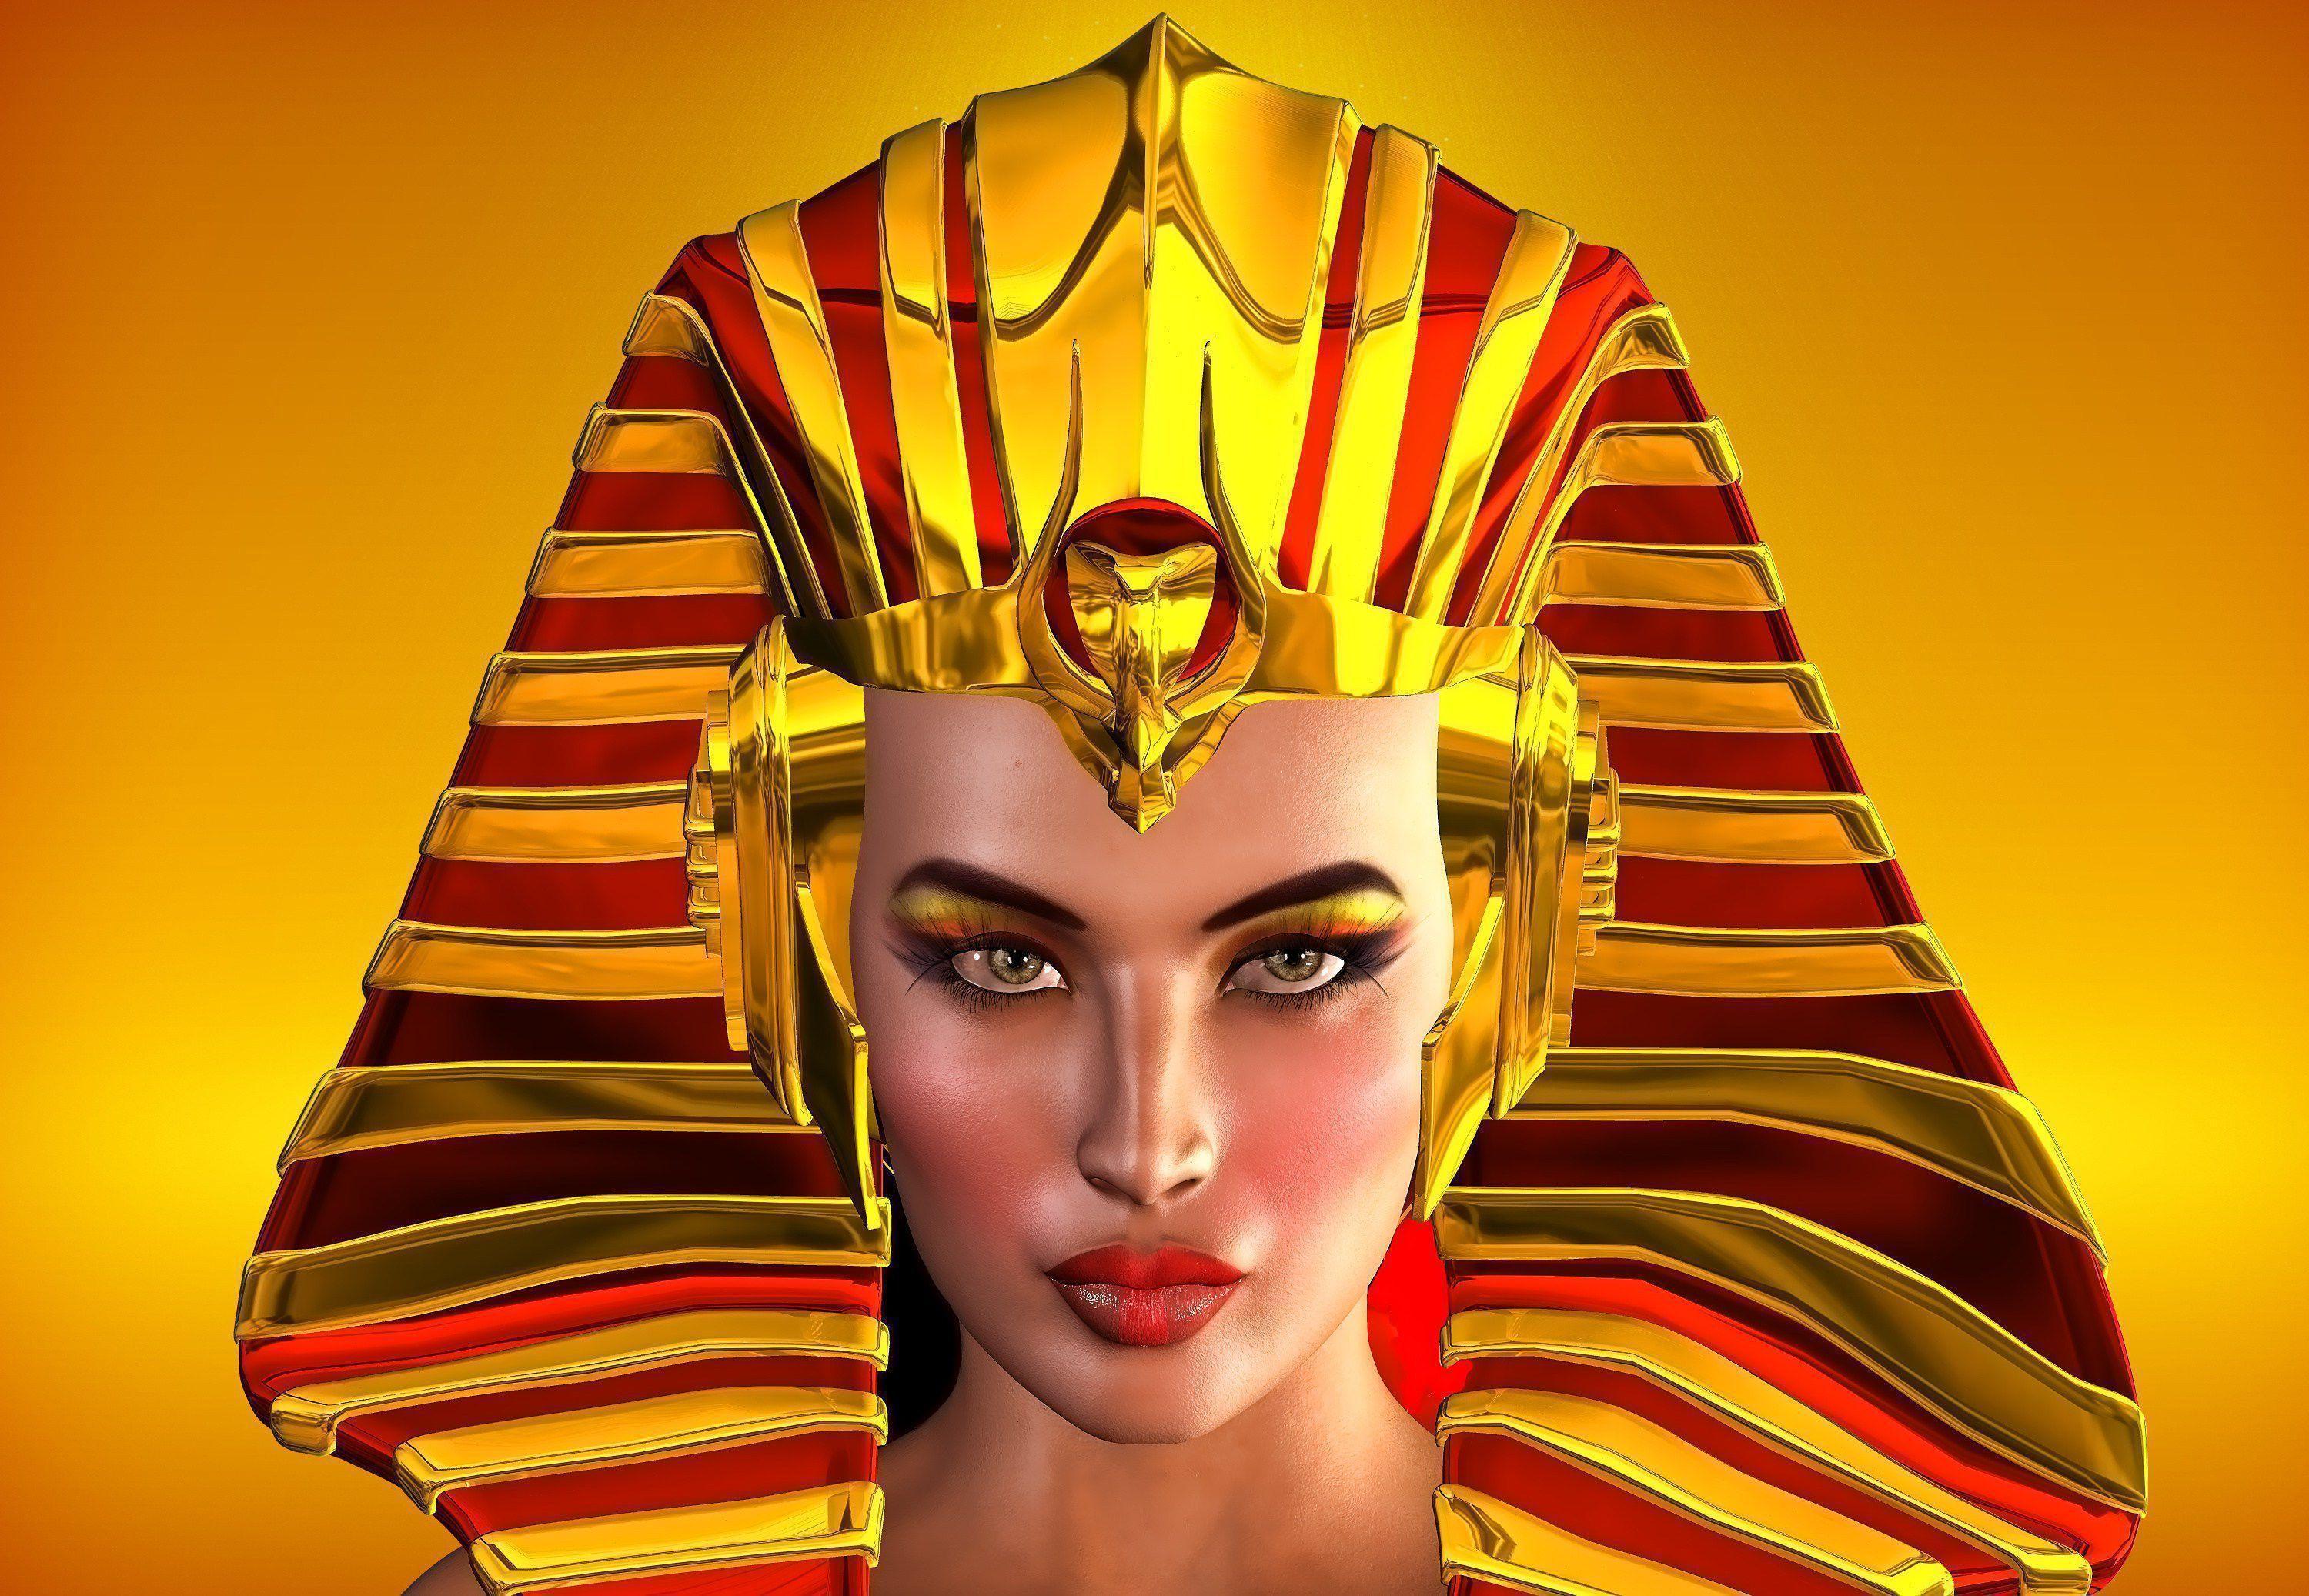 Wallpaper Girl Look Egypt Decoration Art Gold Queen Beautiful  Shine Cleopatra Cleopatra Queen by Lv bowen Lv bowen images for  desktop section прочее  download